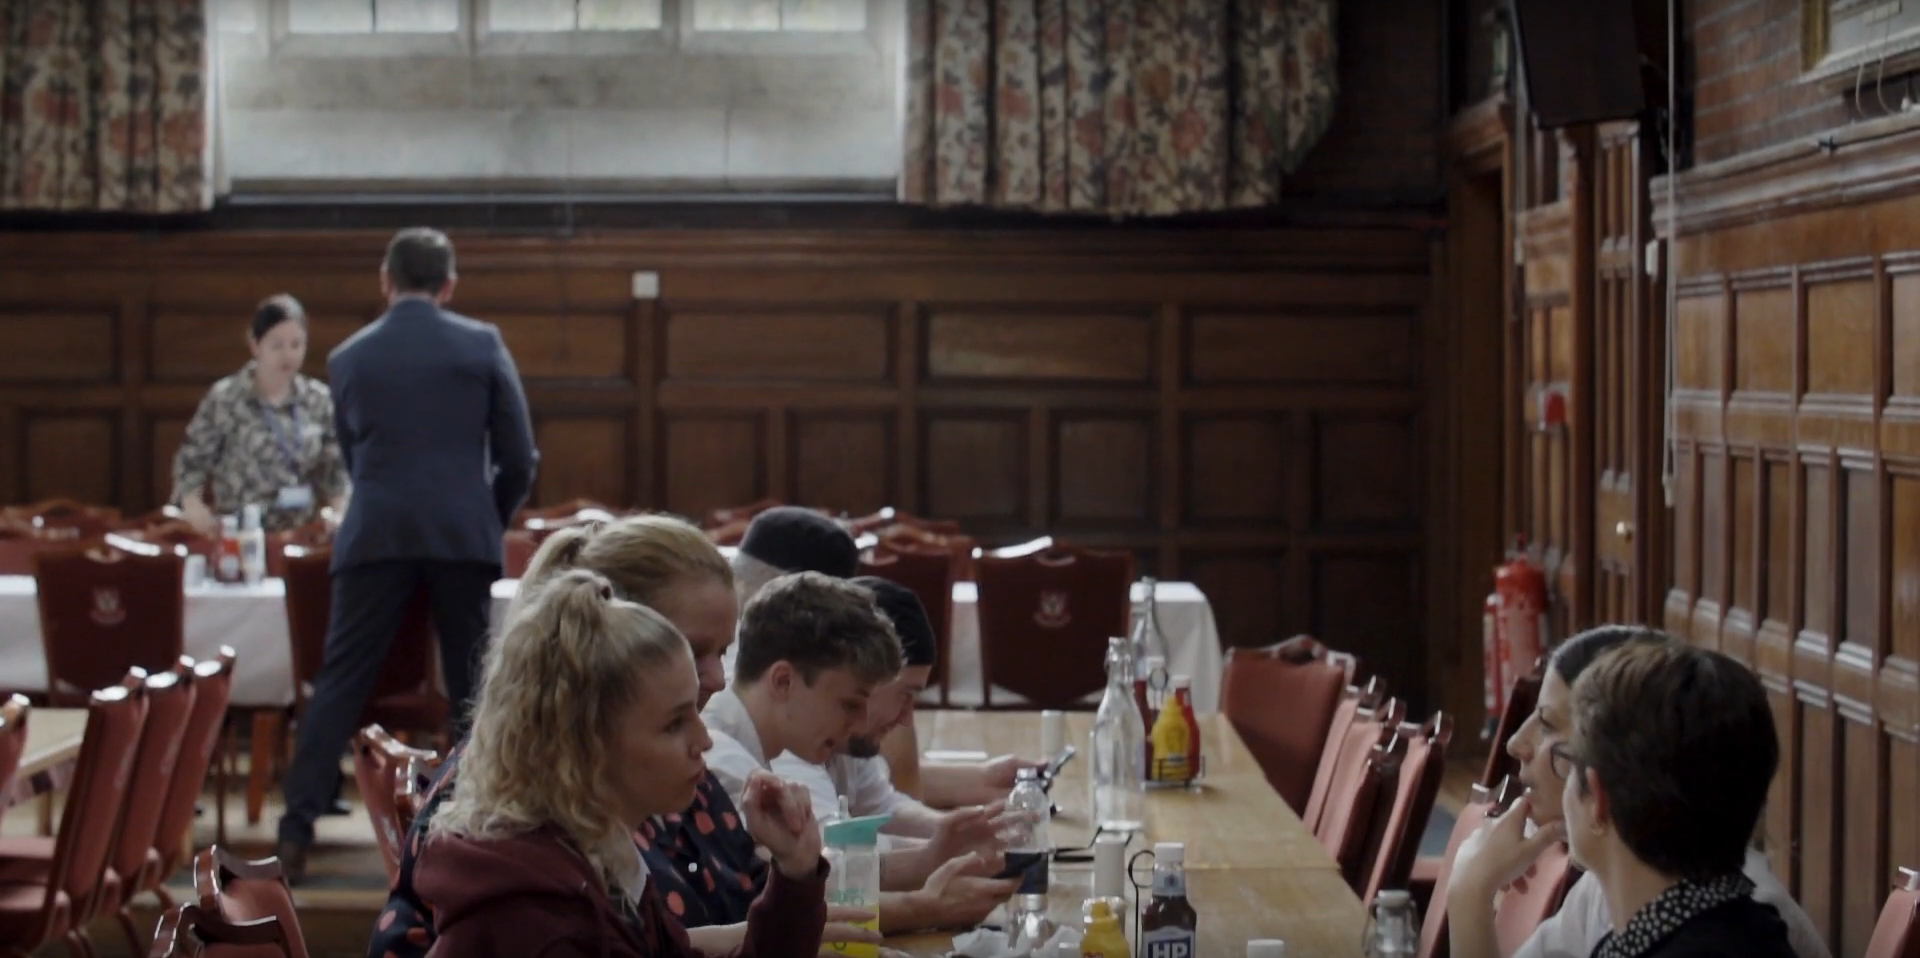 "People of the Great Hall", Homerton College, University of Cambridge Catering team promotional short film.